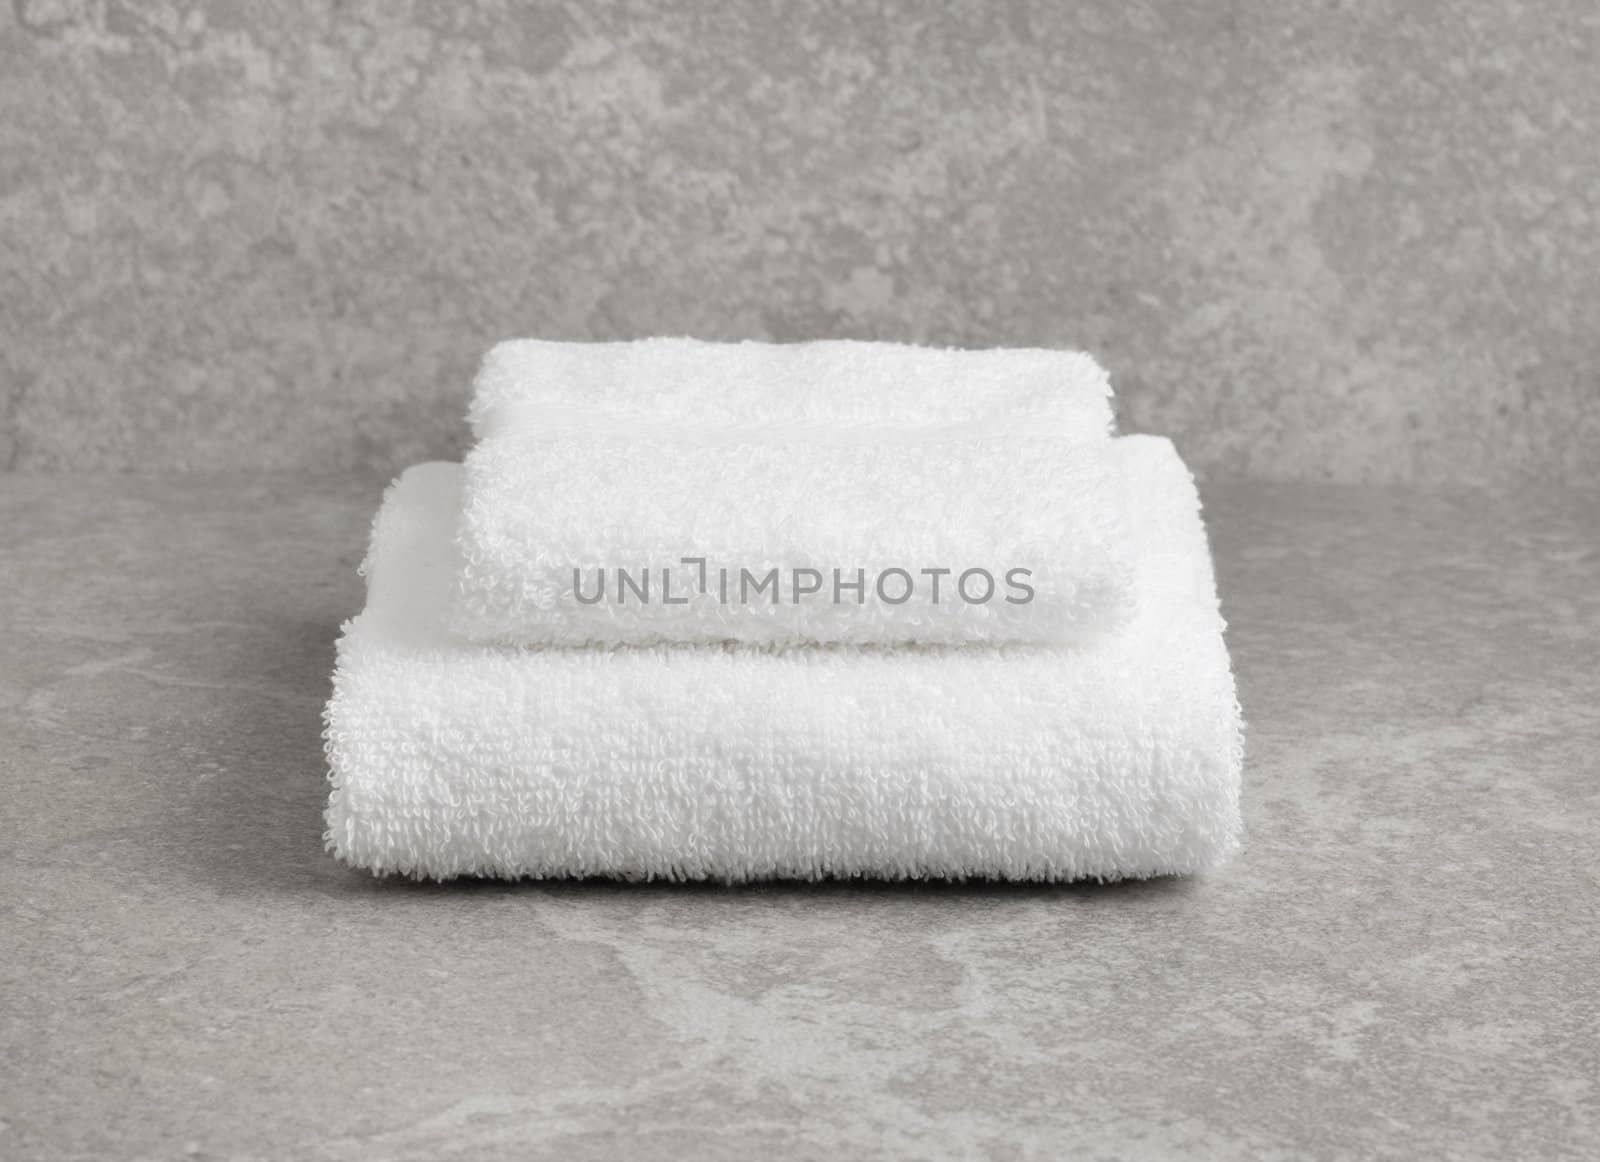 Bathroom object photographed against a granite backdrop.